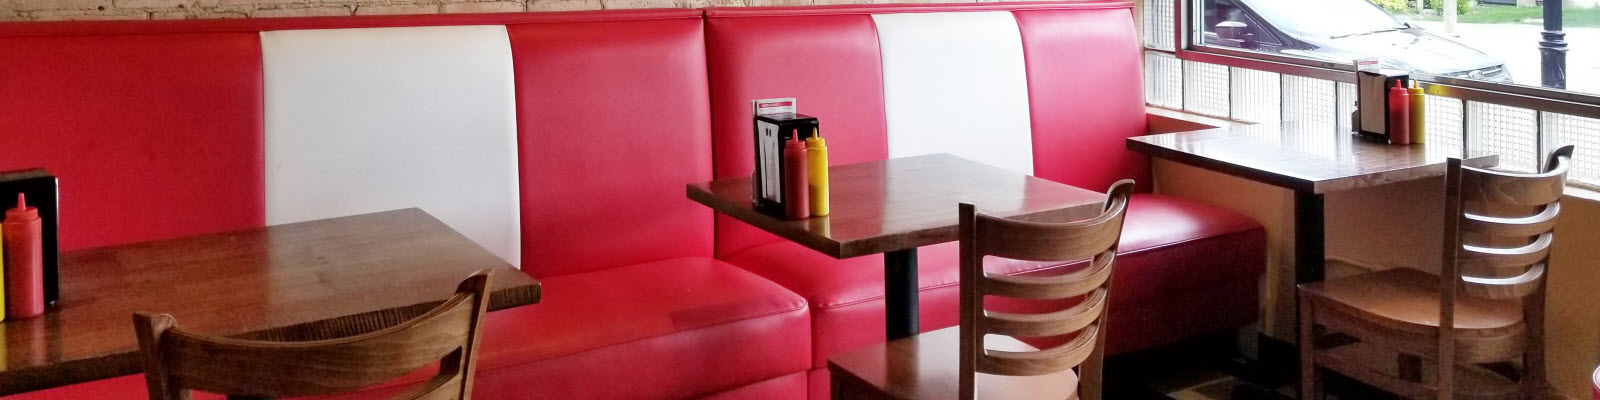 GUIDE TO RESTAURANT BENCH, BANQUETTE & BOOTH SEATING - Table Place Chair